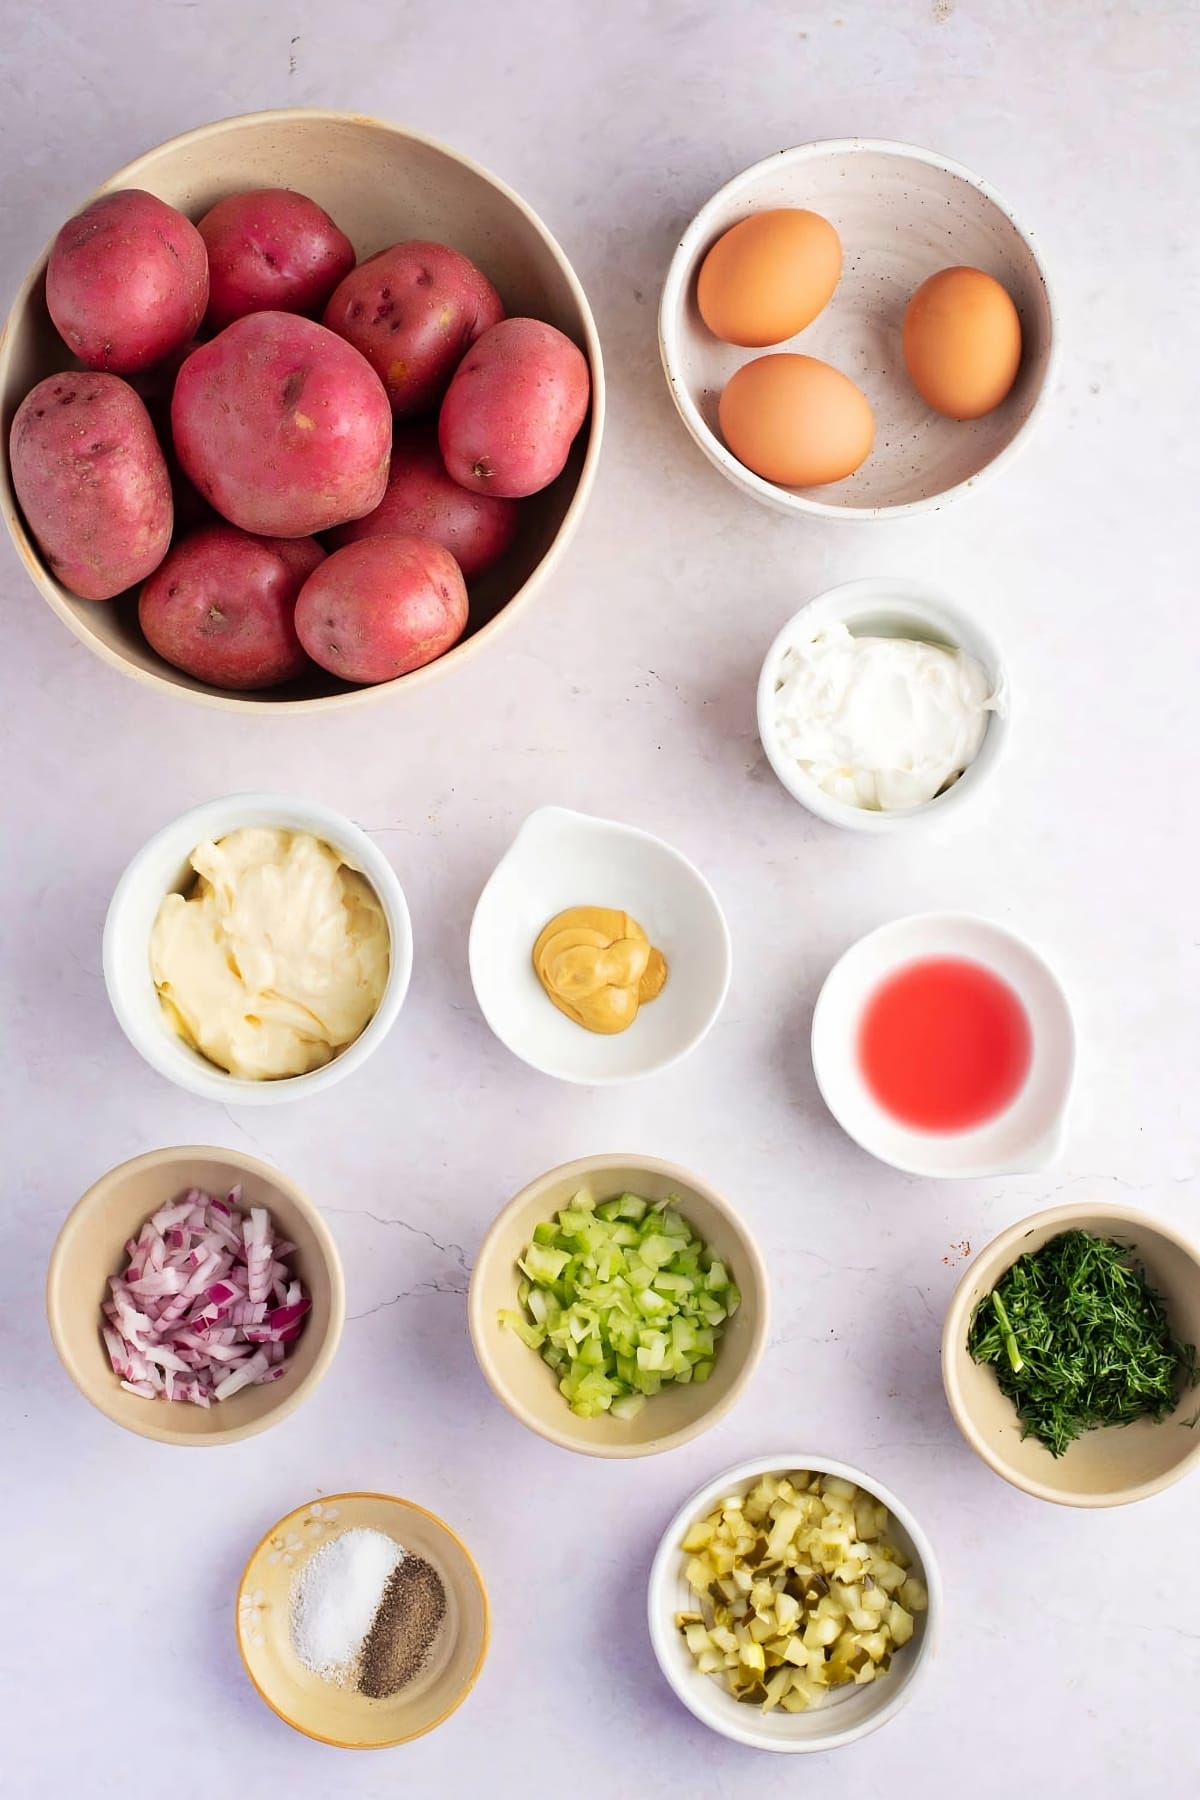 Red Potato Salad Ingredients - Red Potatoes, Mayo, Sour Cream, Dijon Mustard, Red Wine Vinegar, Red Onion, Celery, Seasoning, Dill Pickles and Hard Boiled Egg